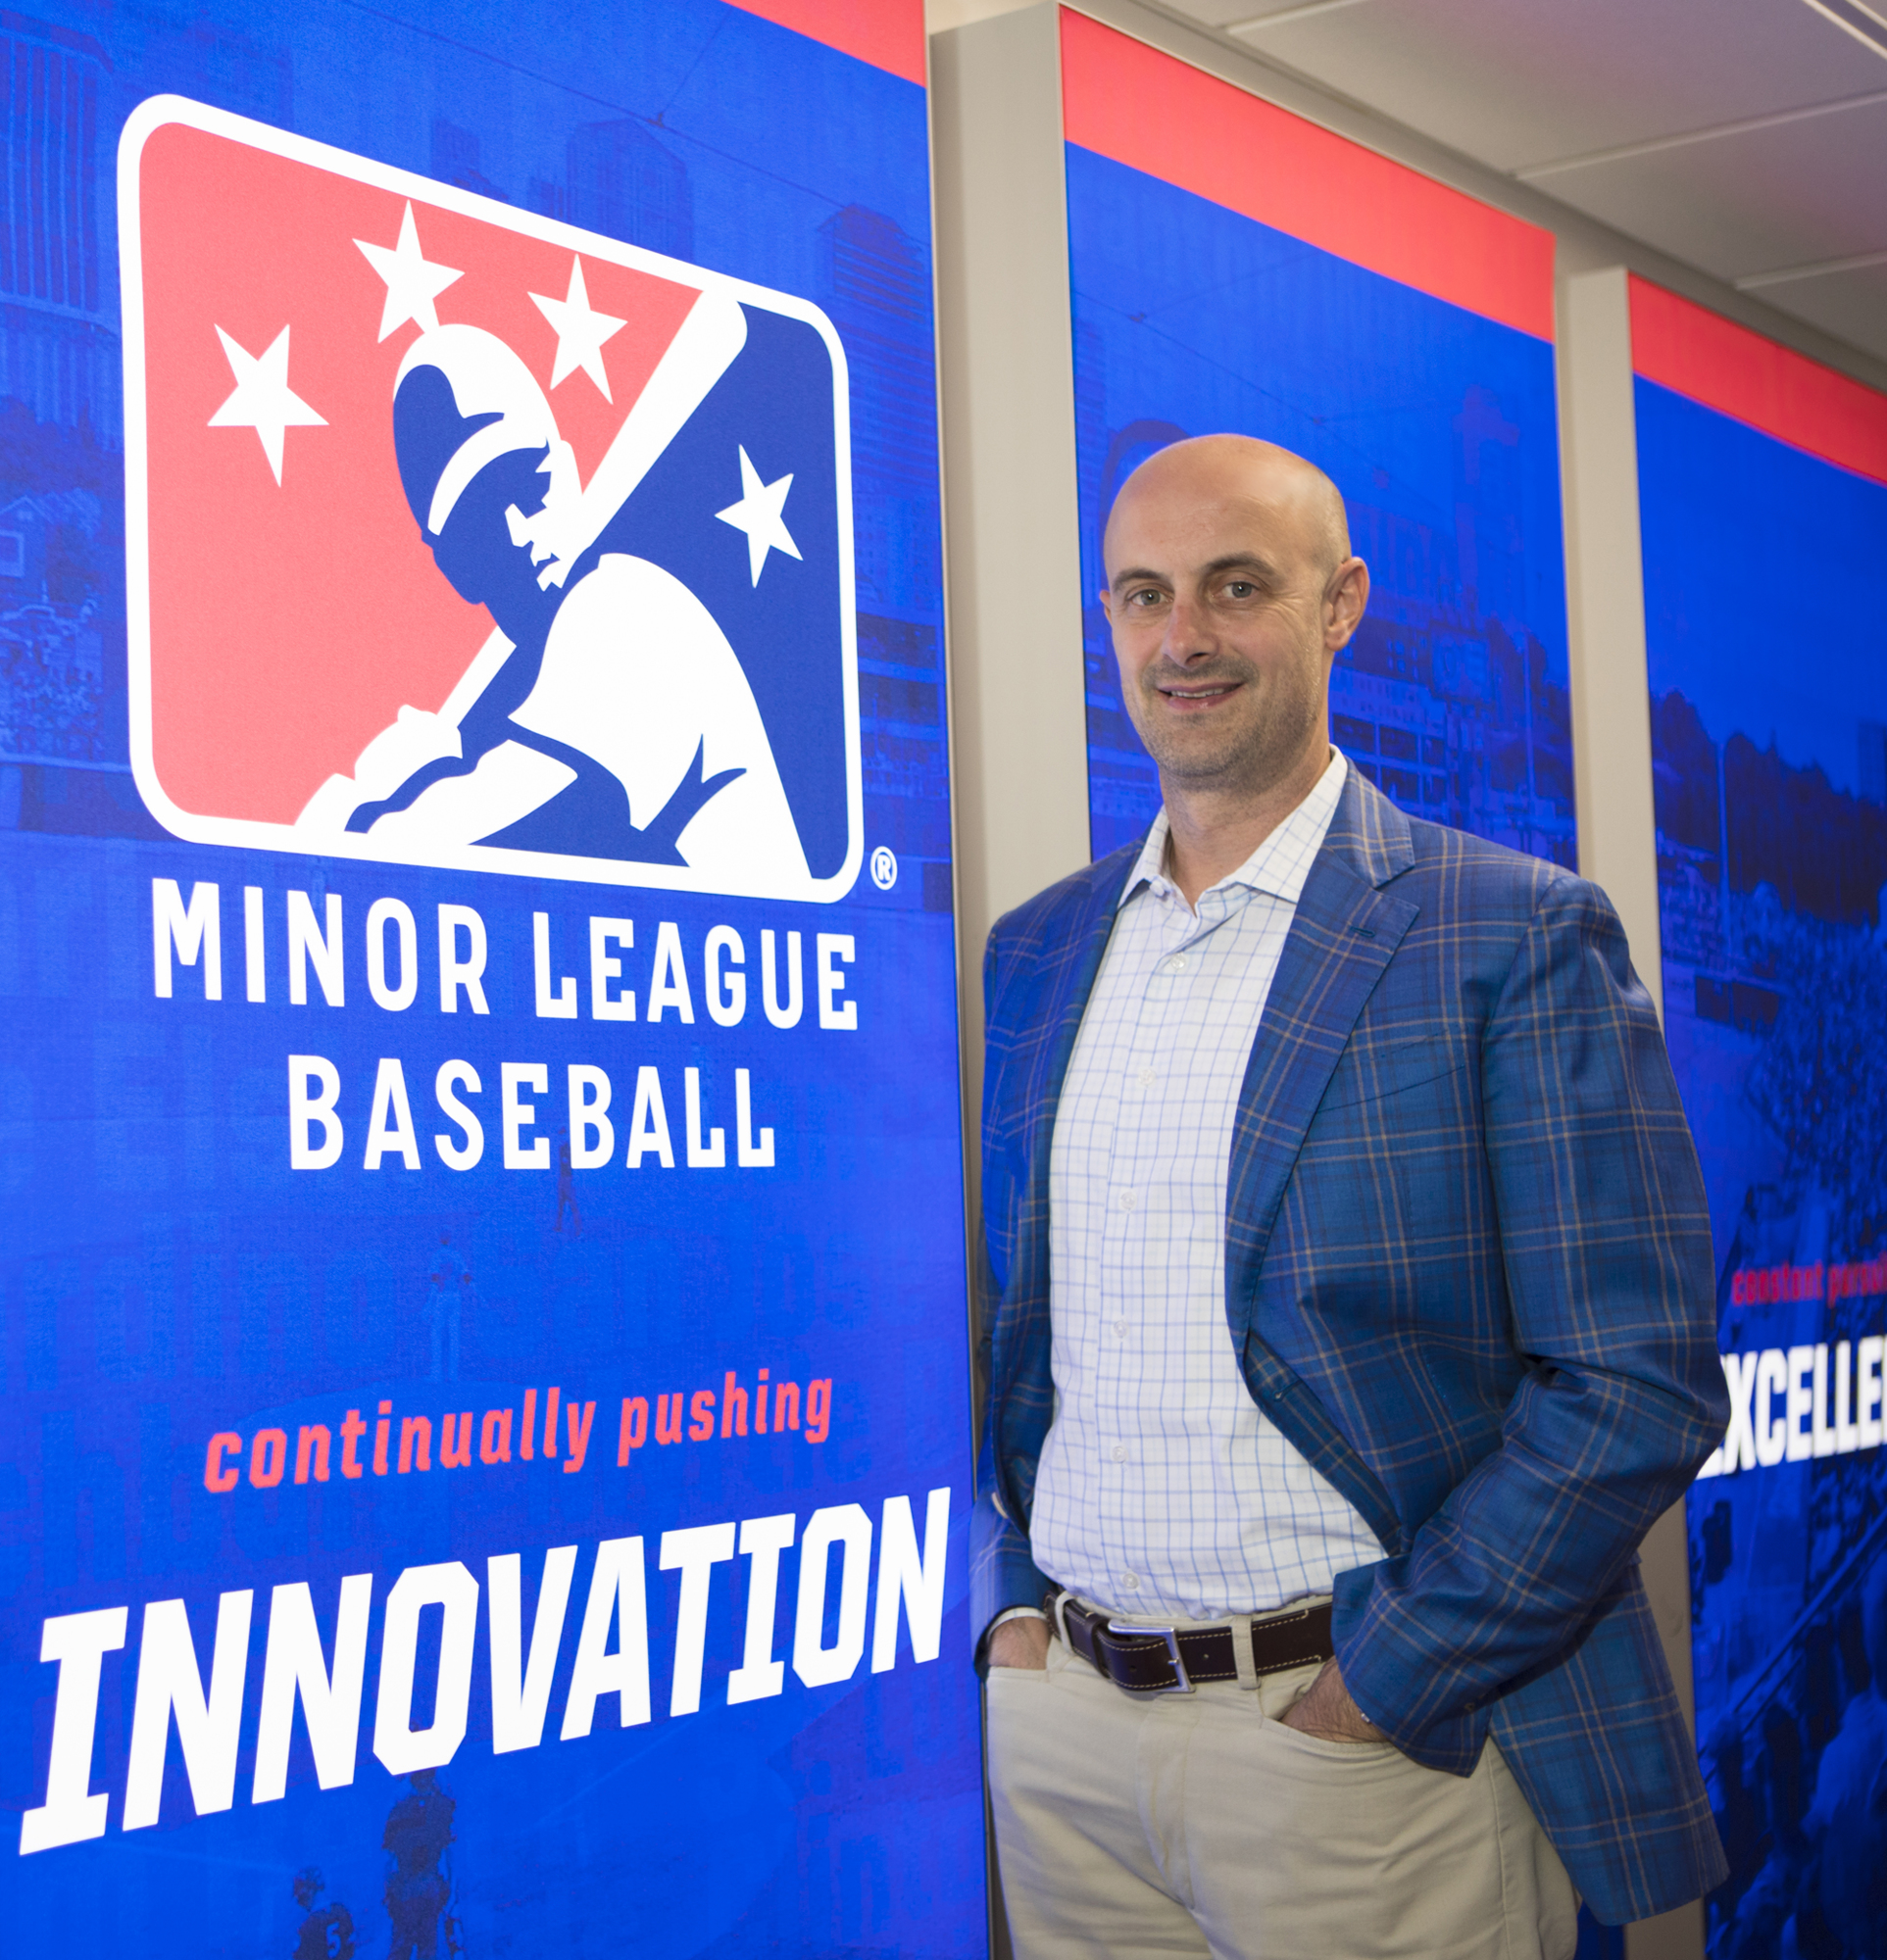 Mark Wemple. David Wright worked for Major League Soccer before switching sports and becoming head of the commercial arm of Minor League Baseball, based in St. Petersburg.